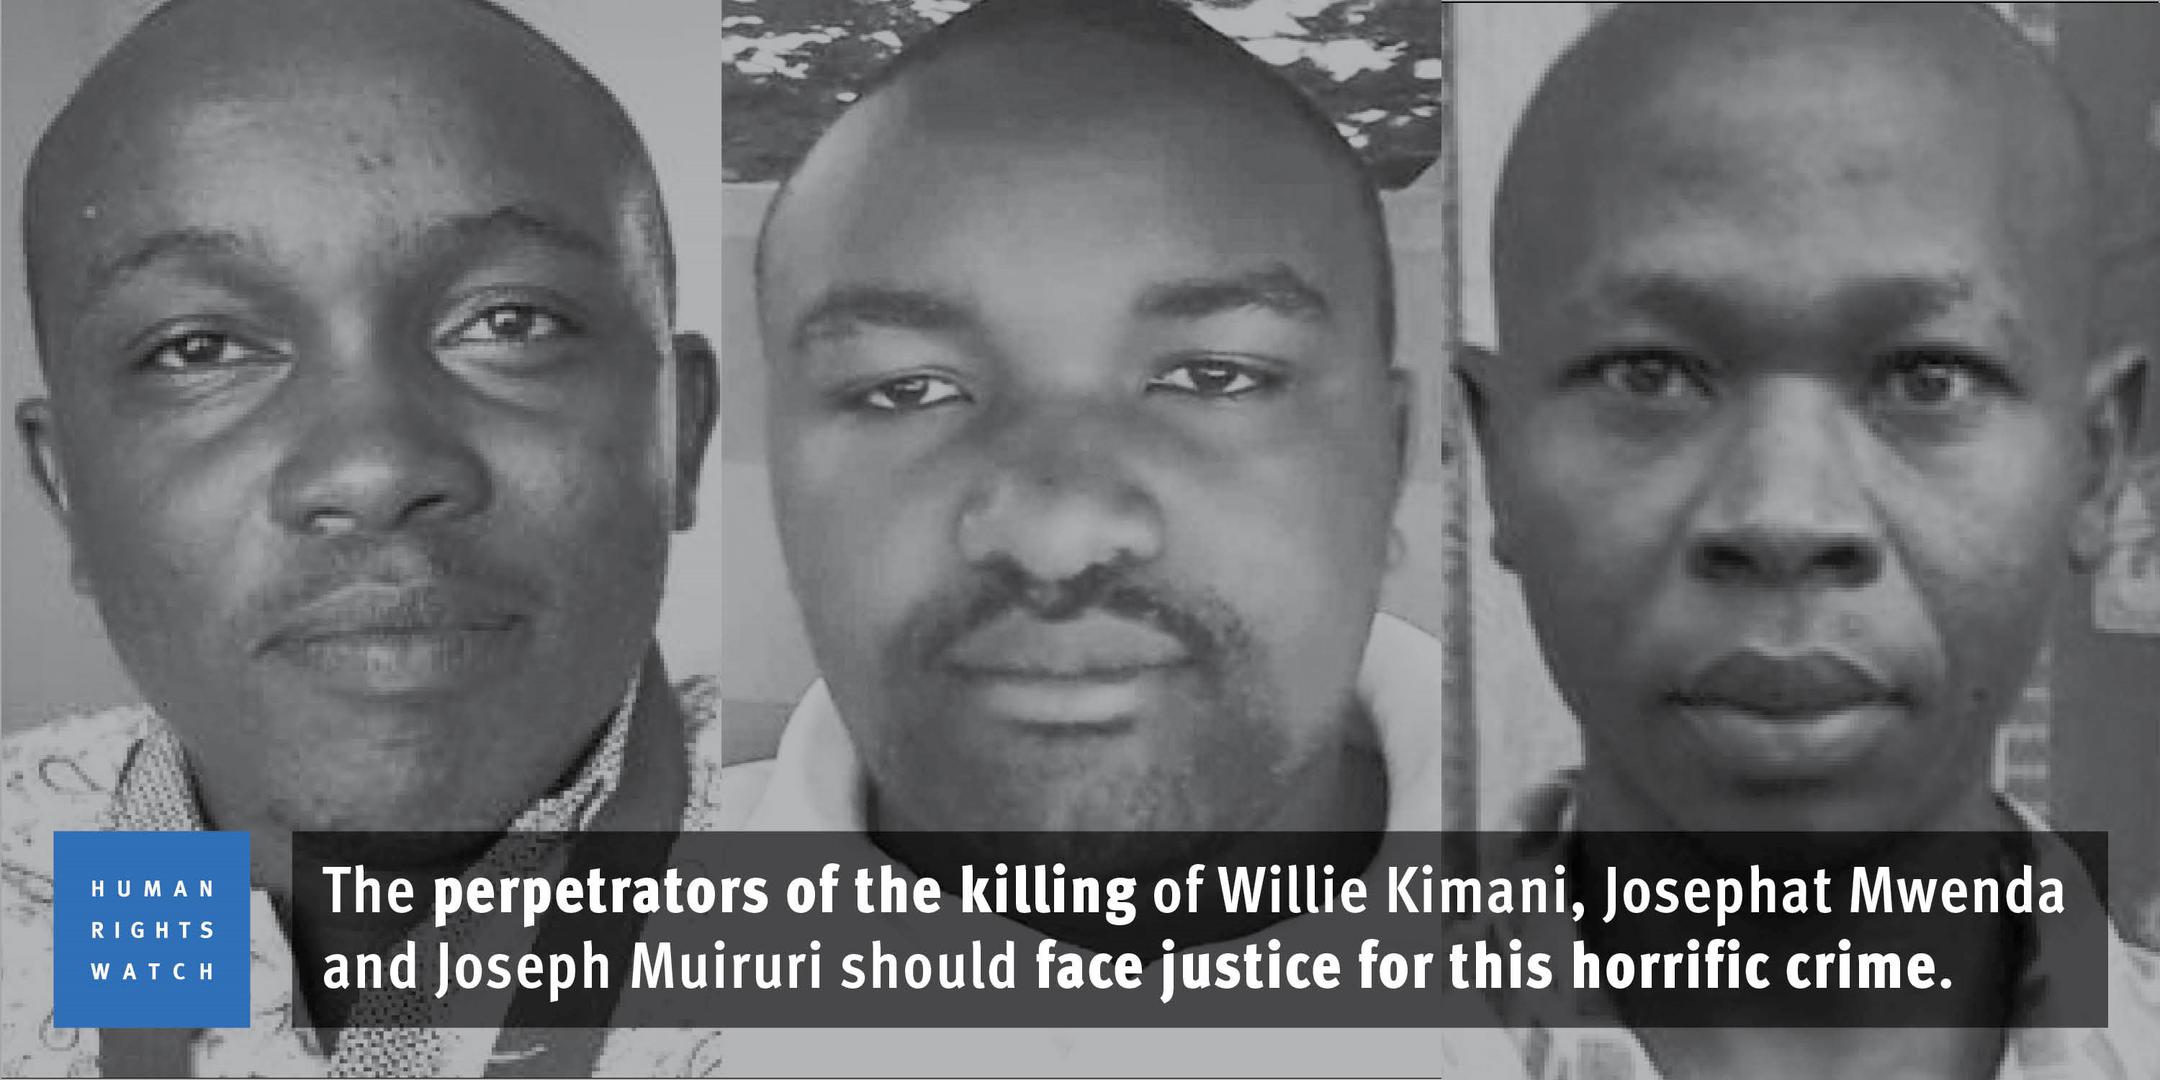 The perpetrators of the killing of Willie Kimani, Josephat Mwenda and Joseph Muiruri should face justice for this horrific crime.